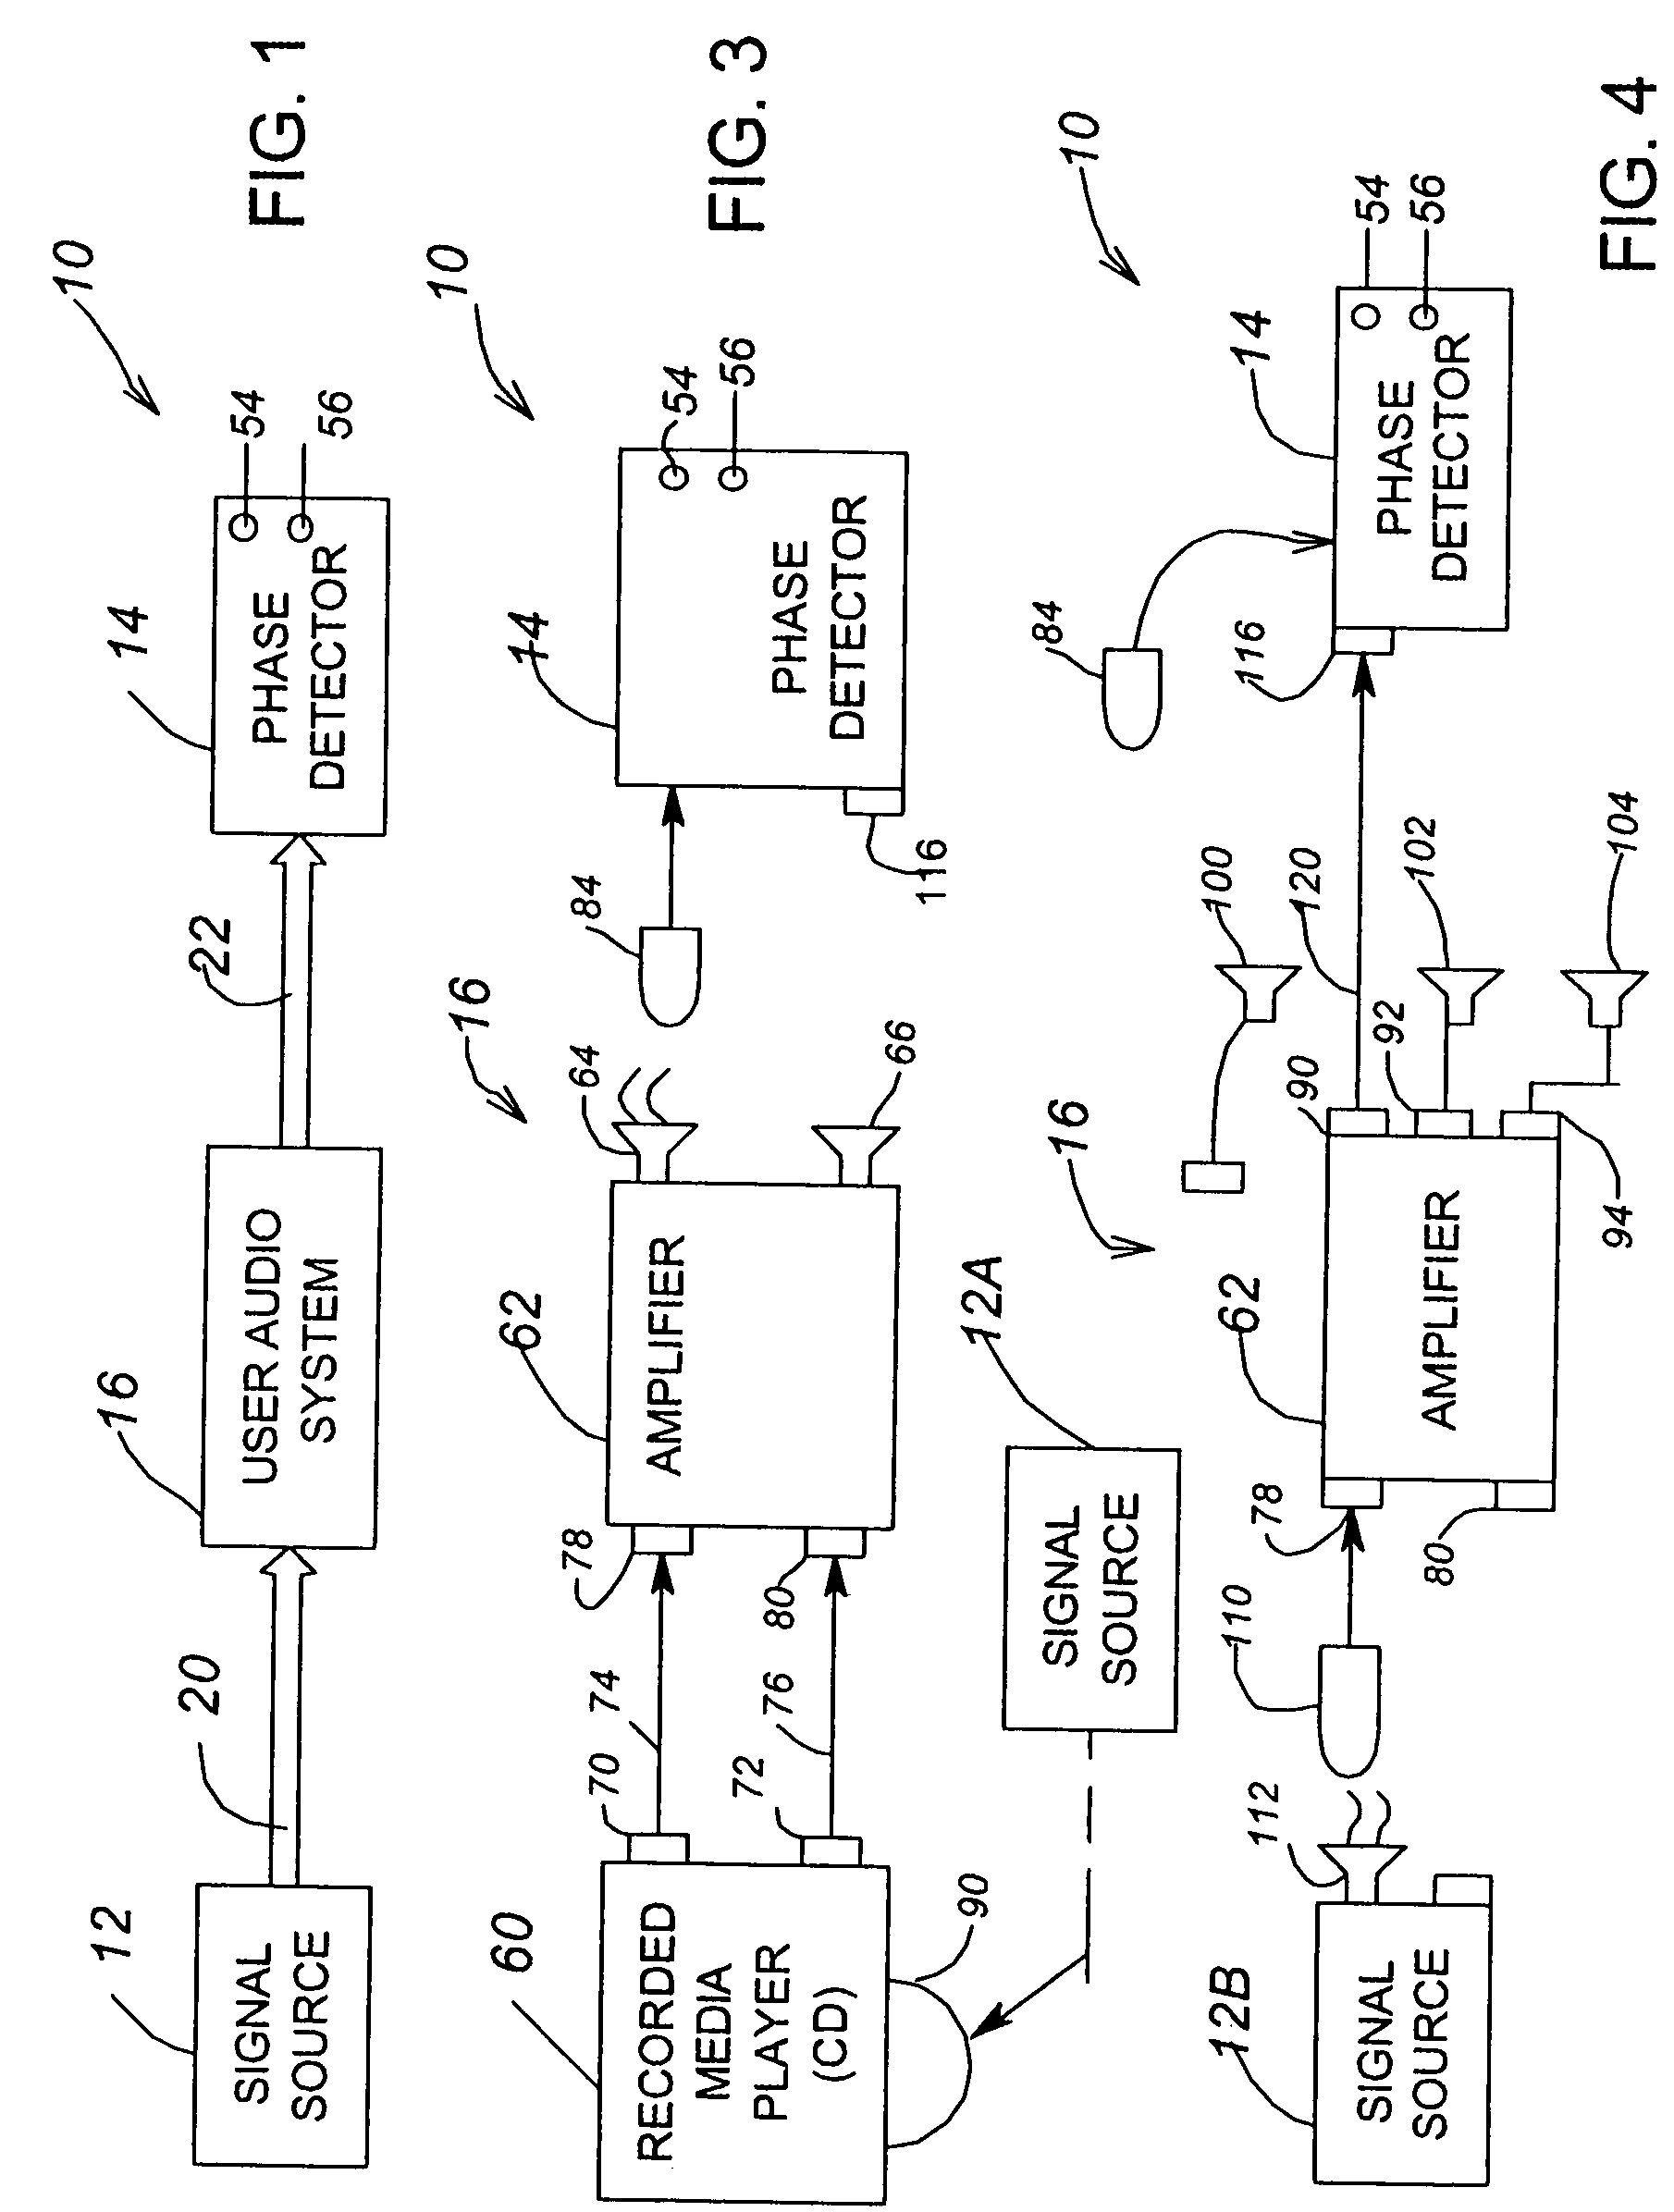 Audio signal phase detection system and method